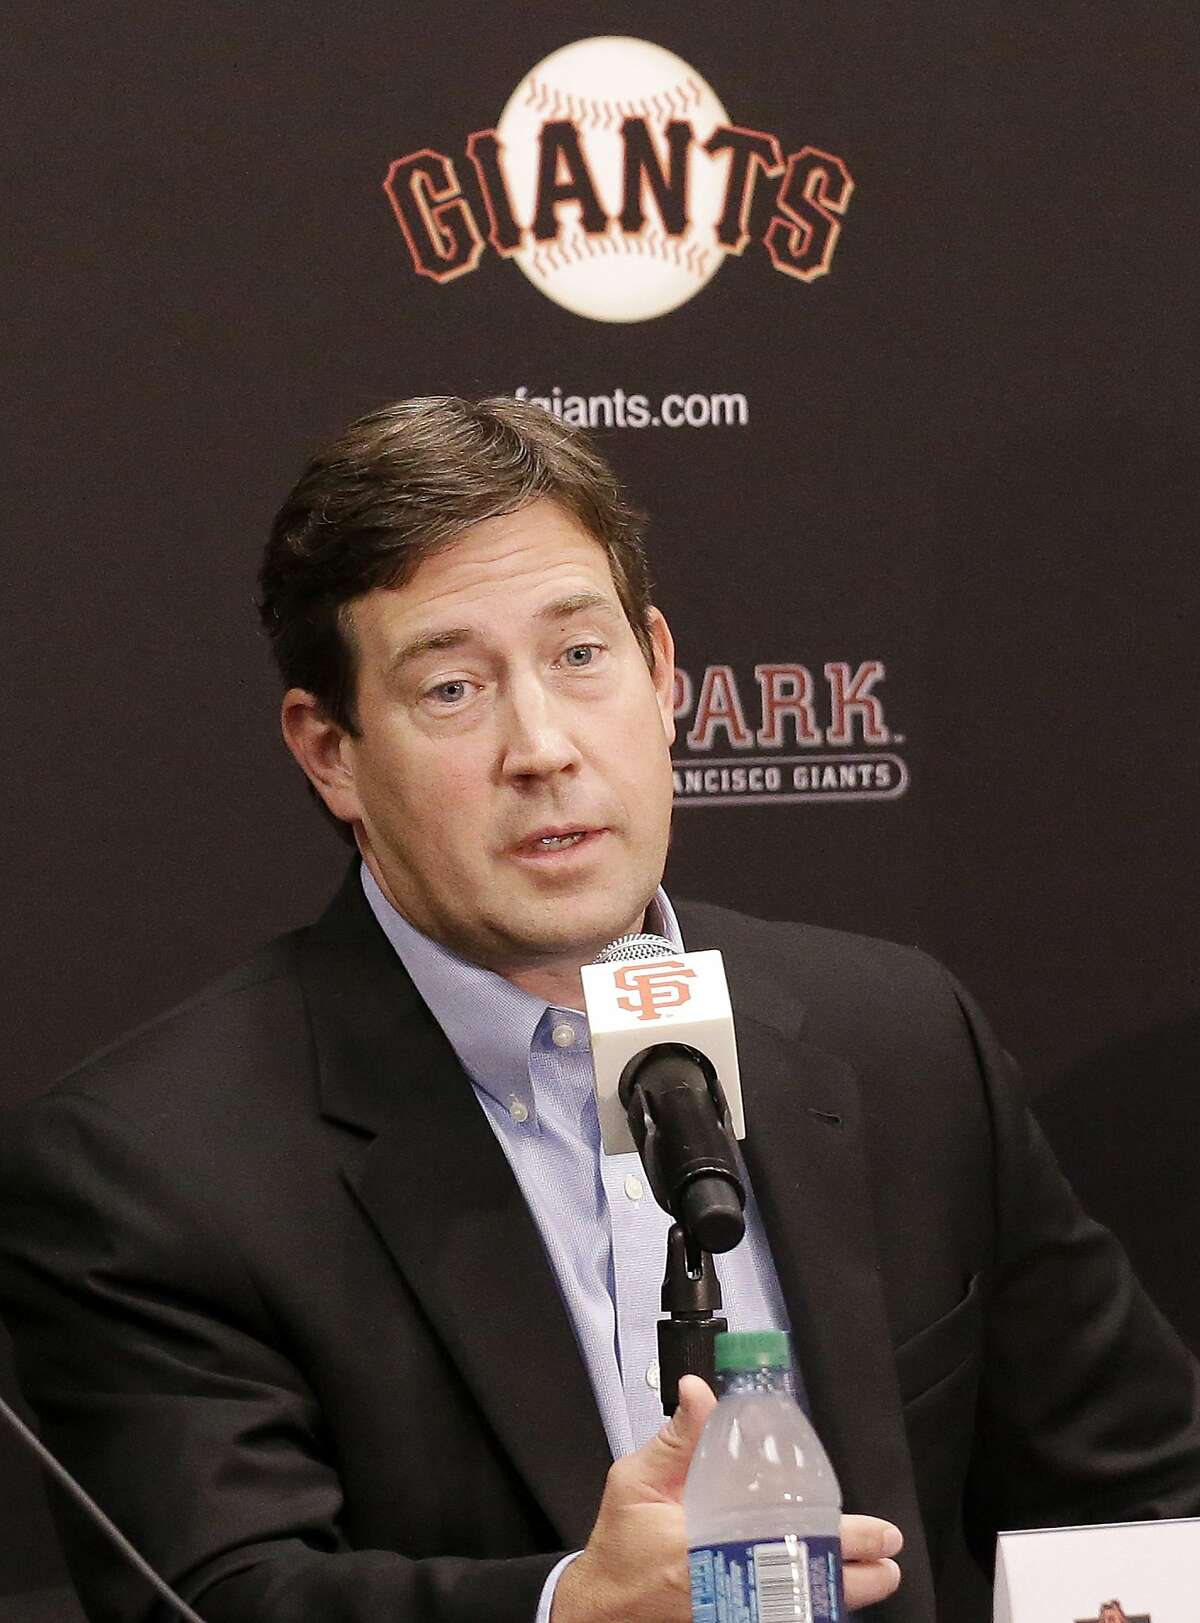 San Francisco Giants vice president and general manager Bobby Evans speaks at a news conference in San Francisco, Monday, Oct. 5, 2015. (AP Photo/Jeff Chiu)